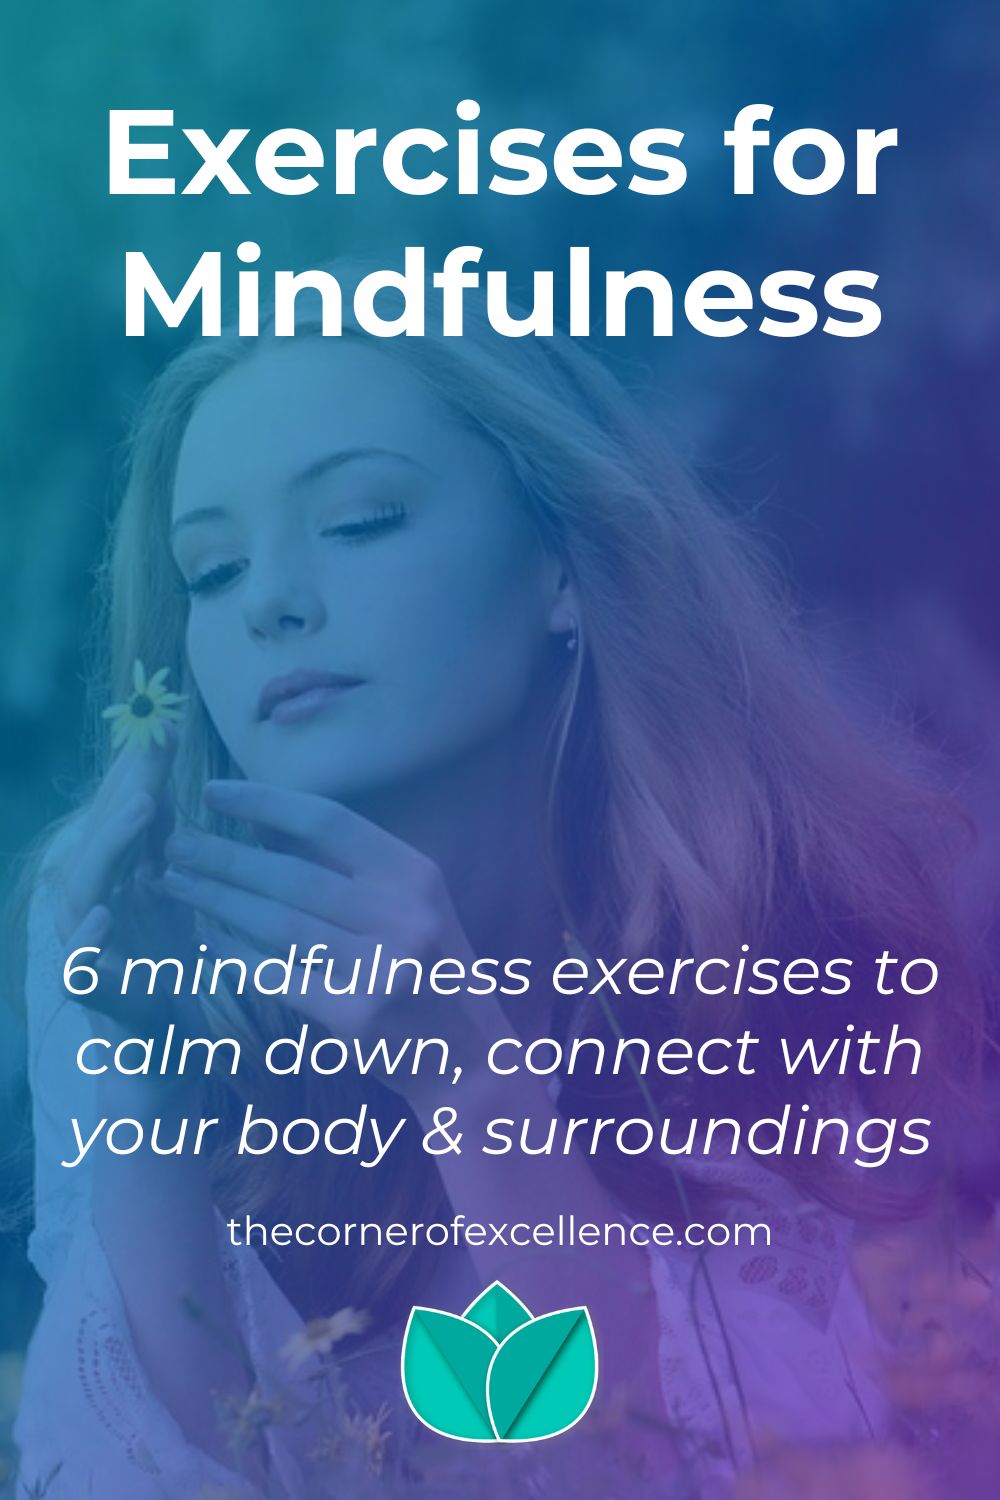 exercises for mindfulness exercises calm down girl looking at flower